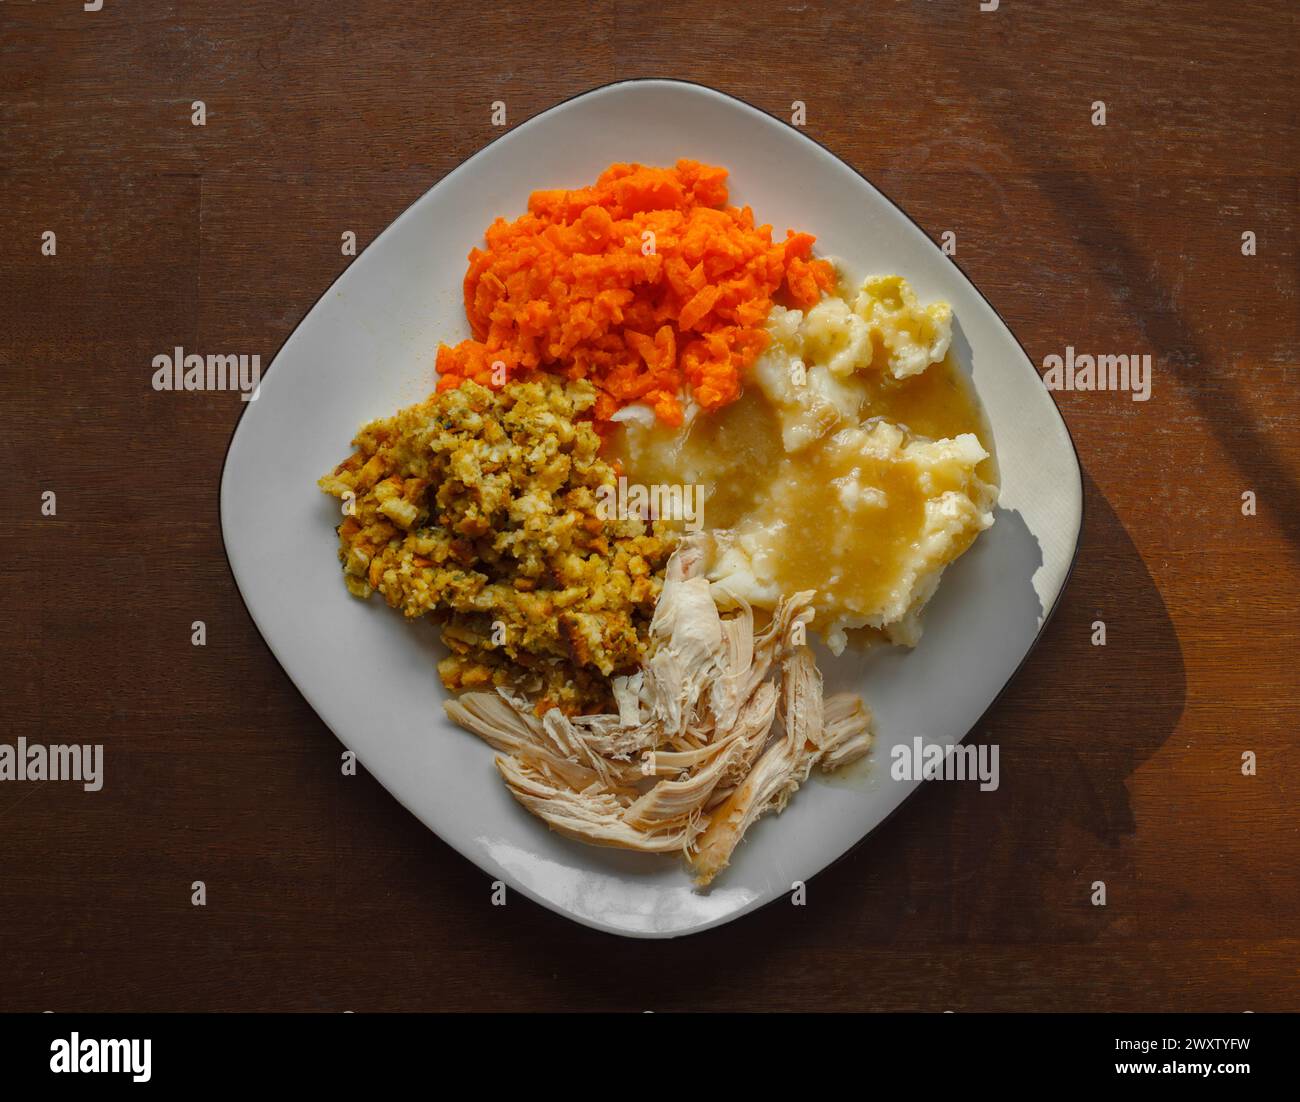 Turkey dinner on a white plate with potatoes, gravy, stuffing and carrots Stock Photo